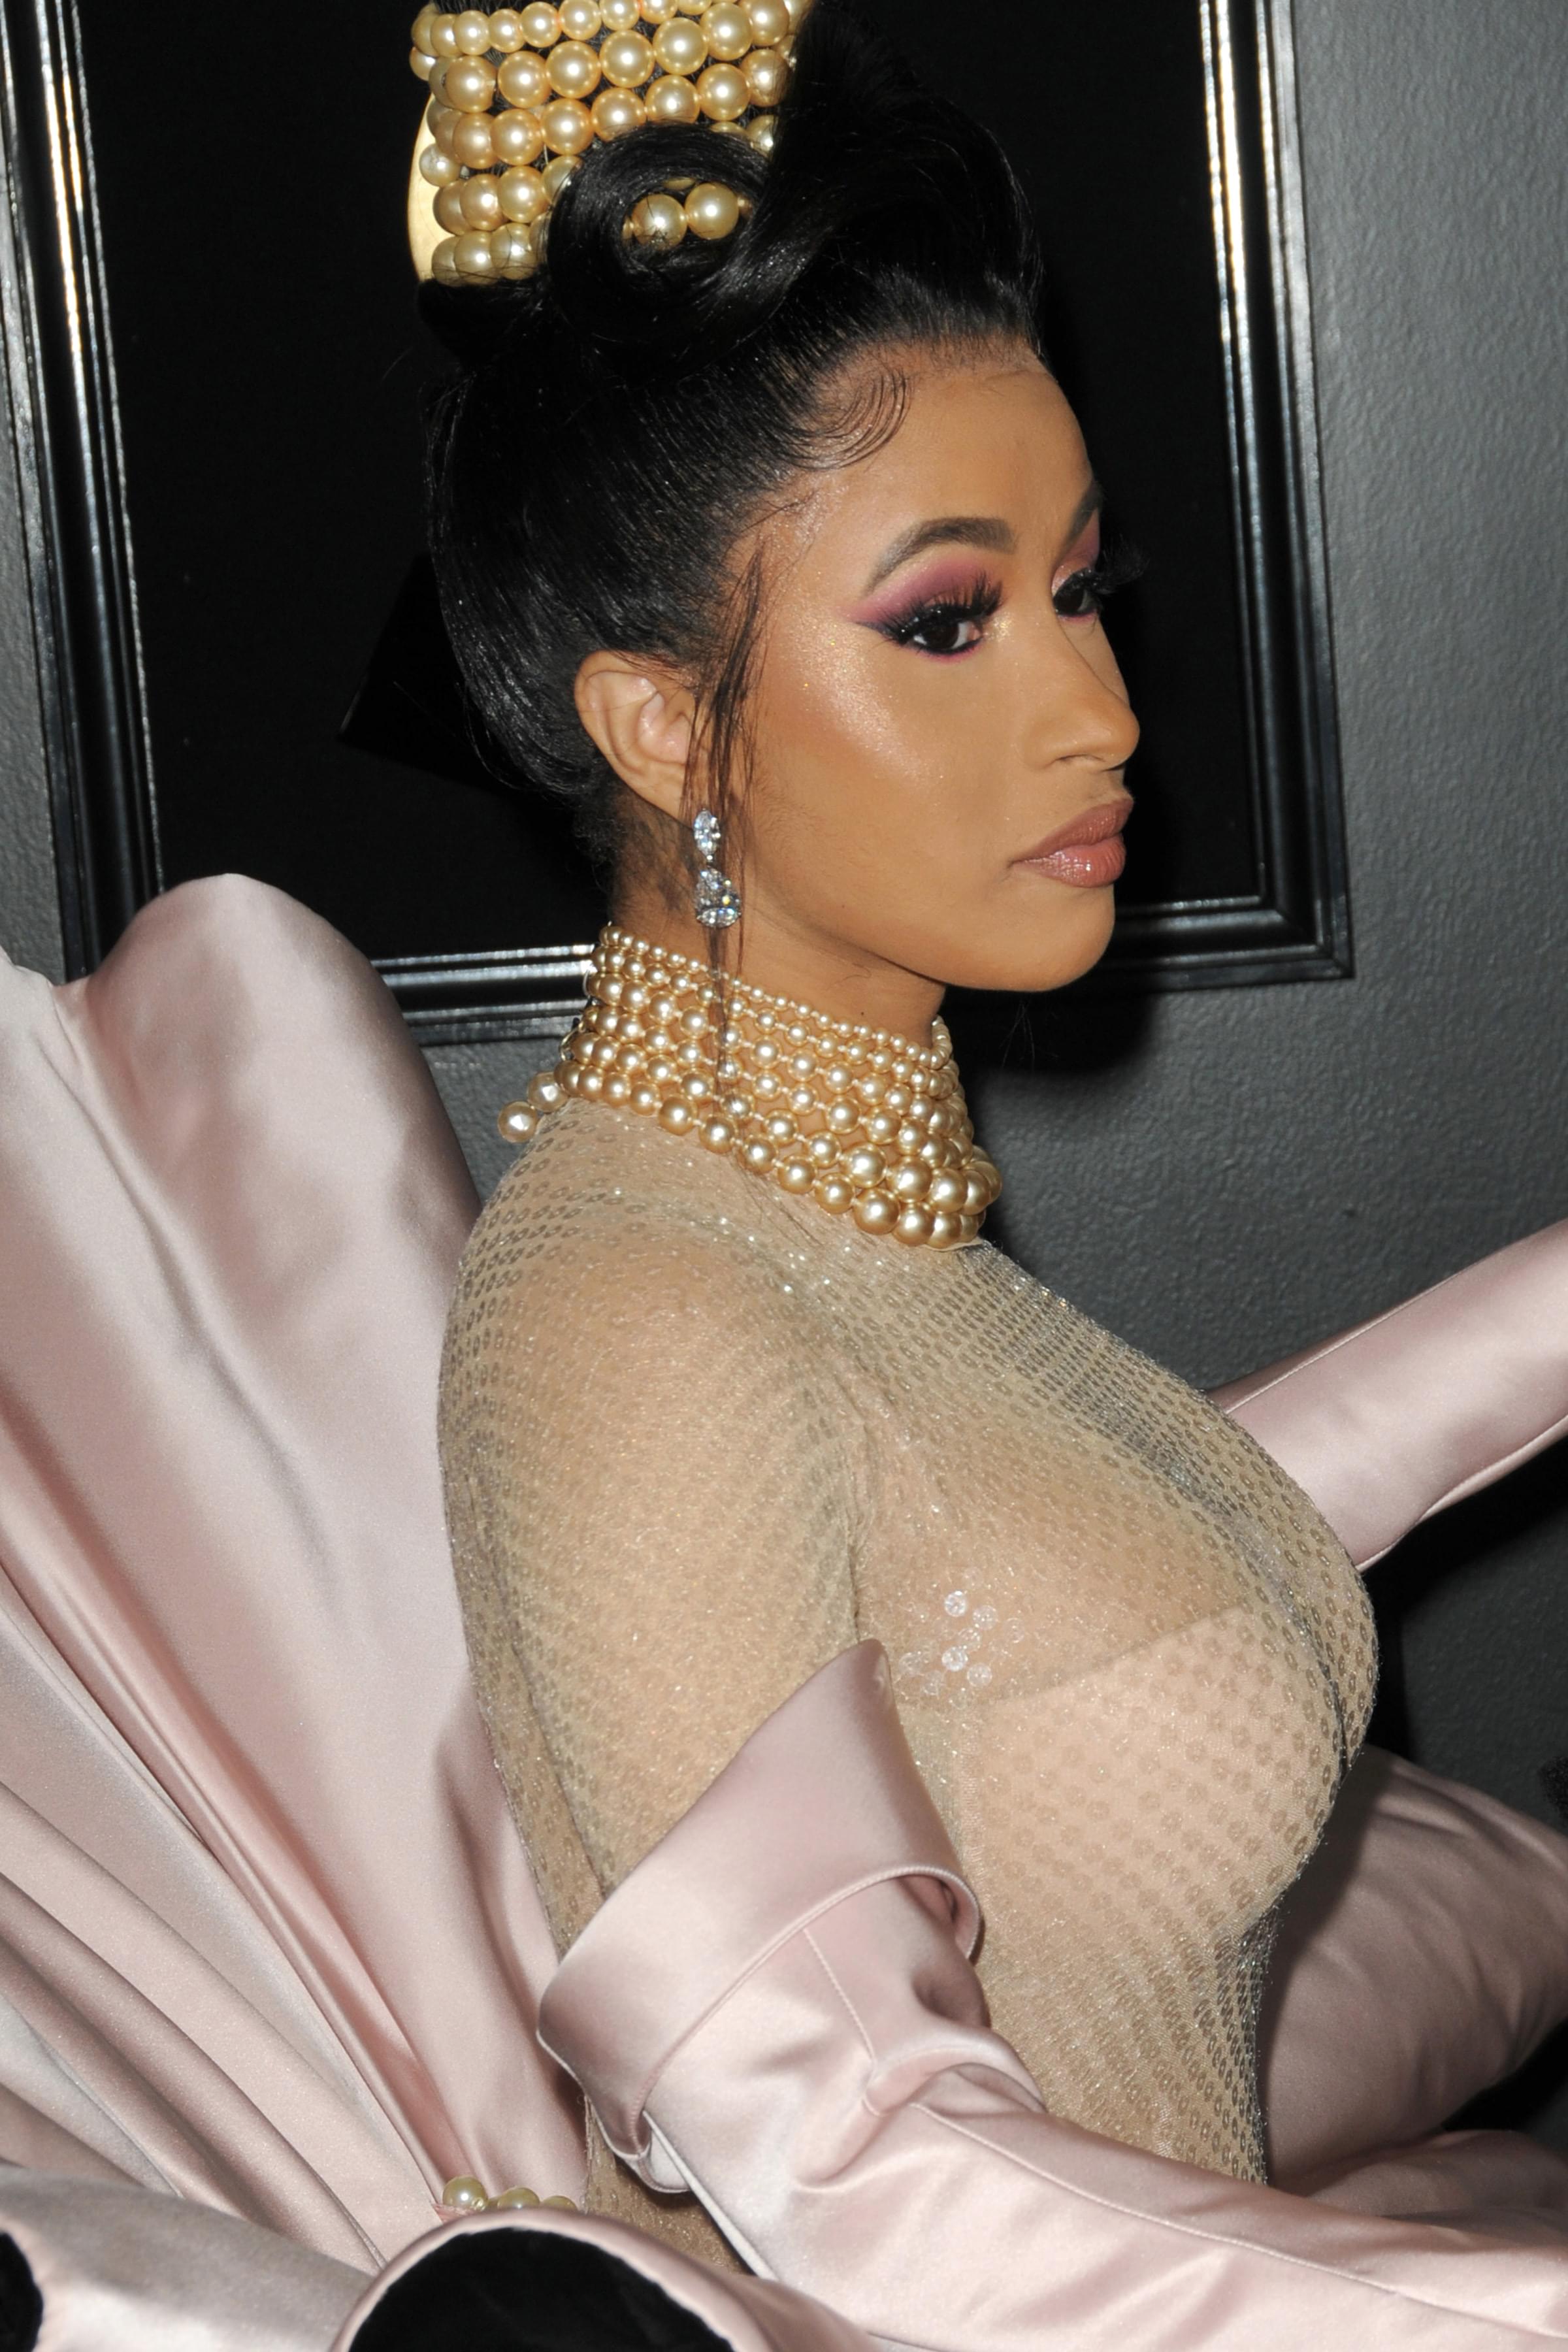 New Shoes, Who Dis? Cardi B. Snags a Deal!